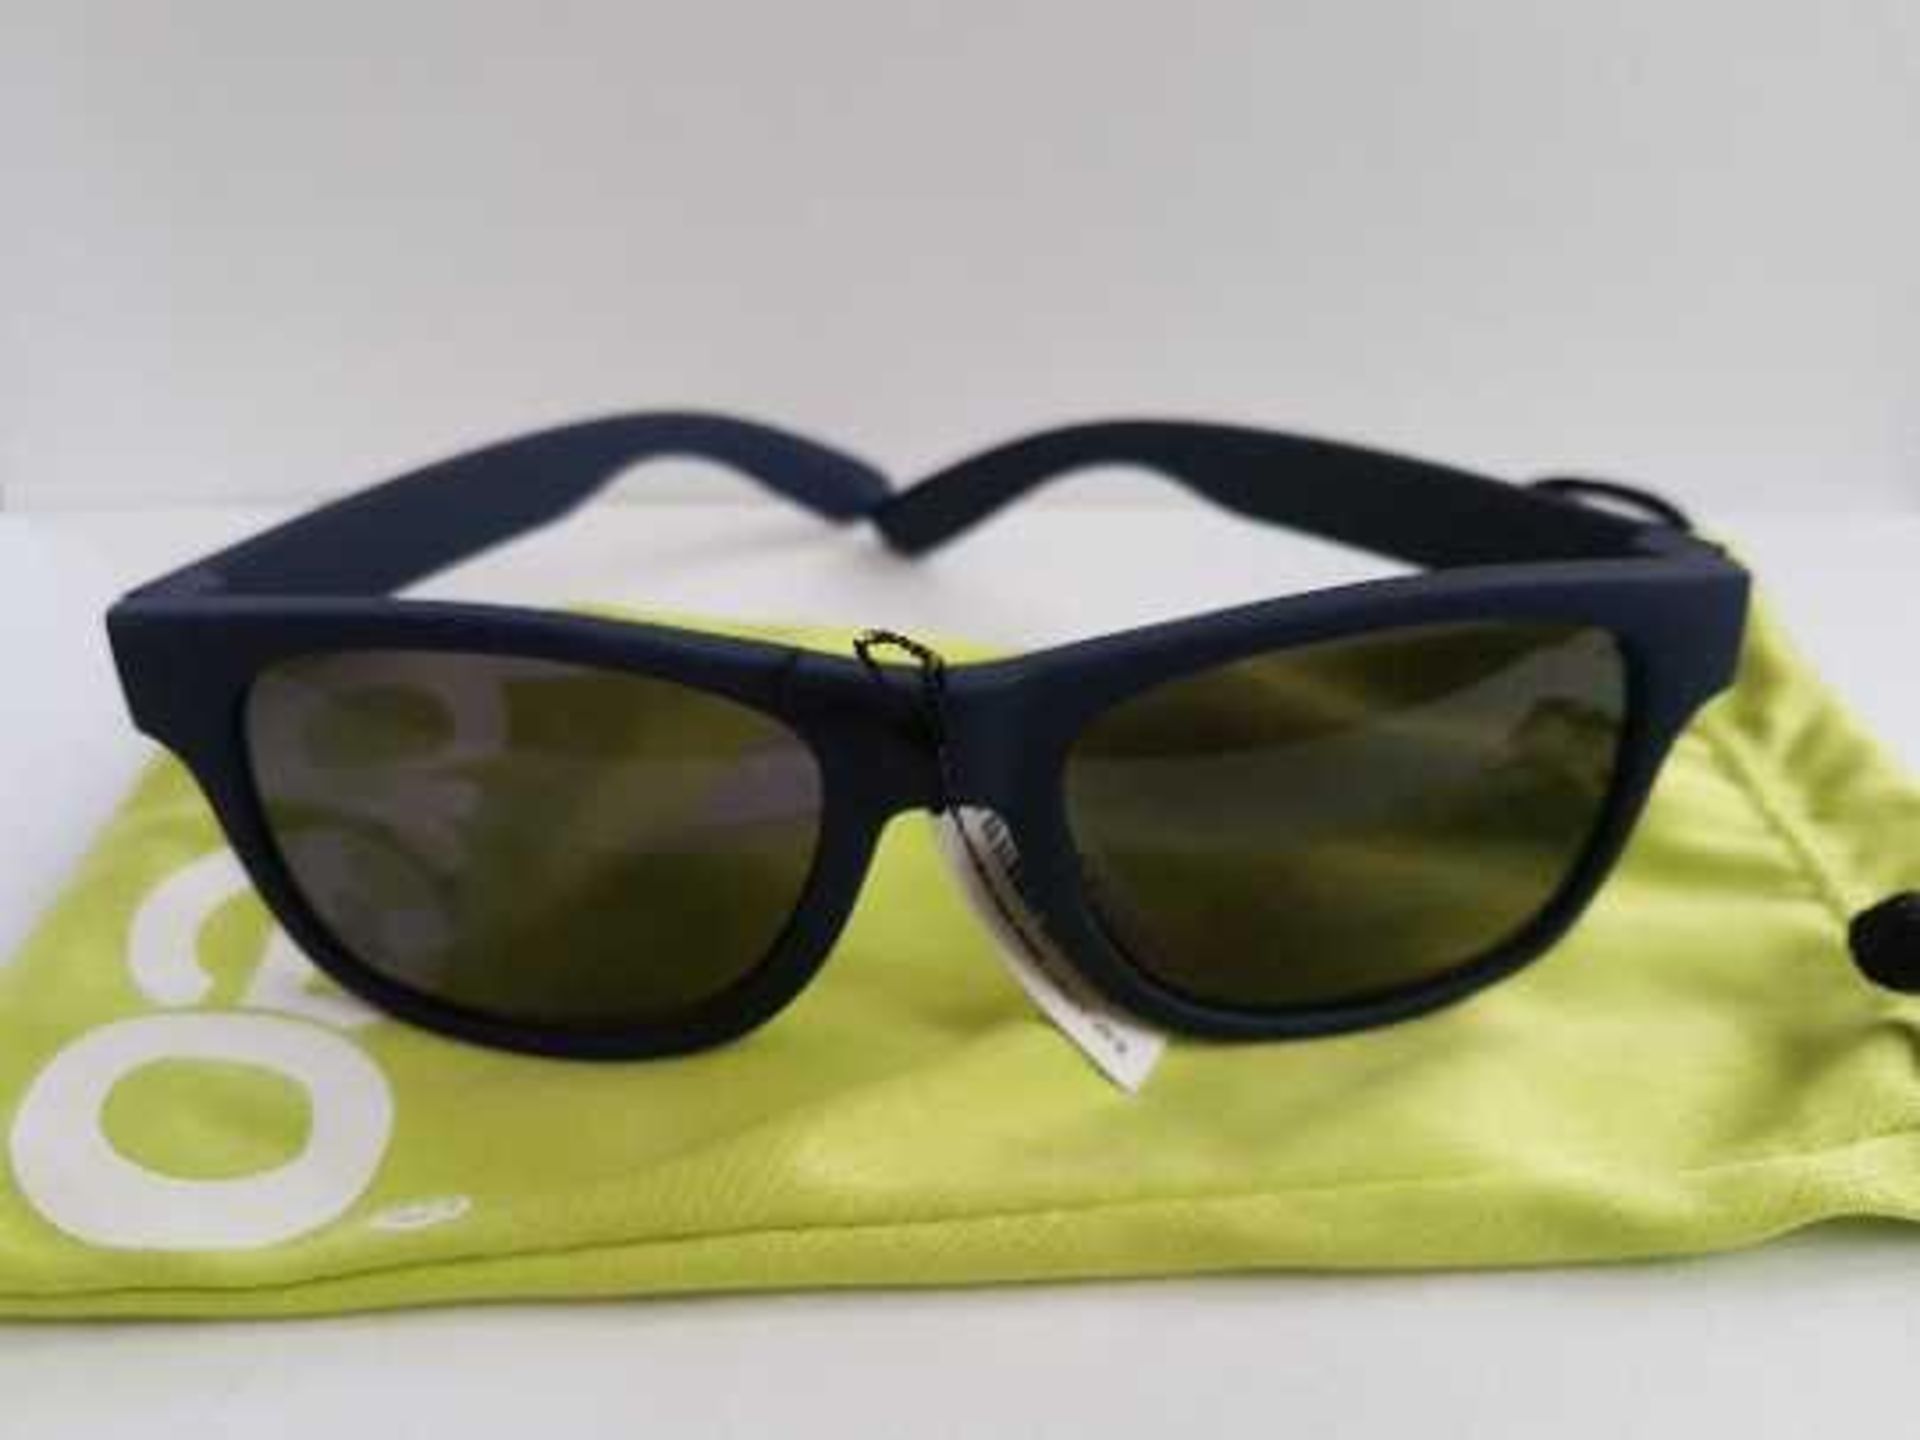 2x Breo uptone junior sunglasses in navy, new and factory sealed in packaging. - Image 4 of 4